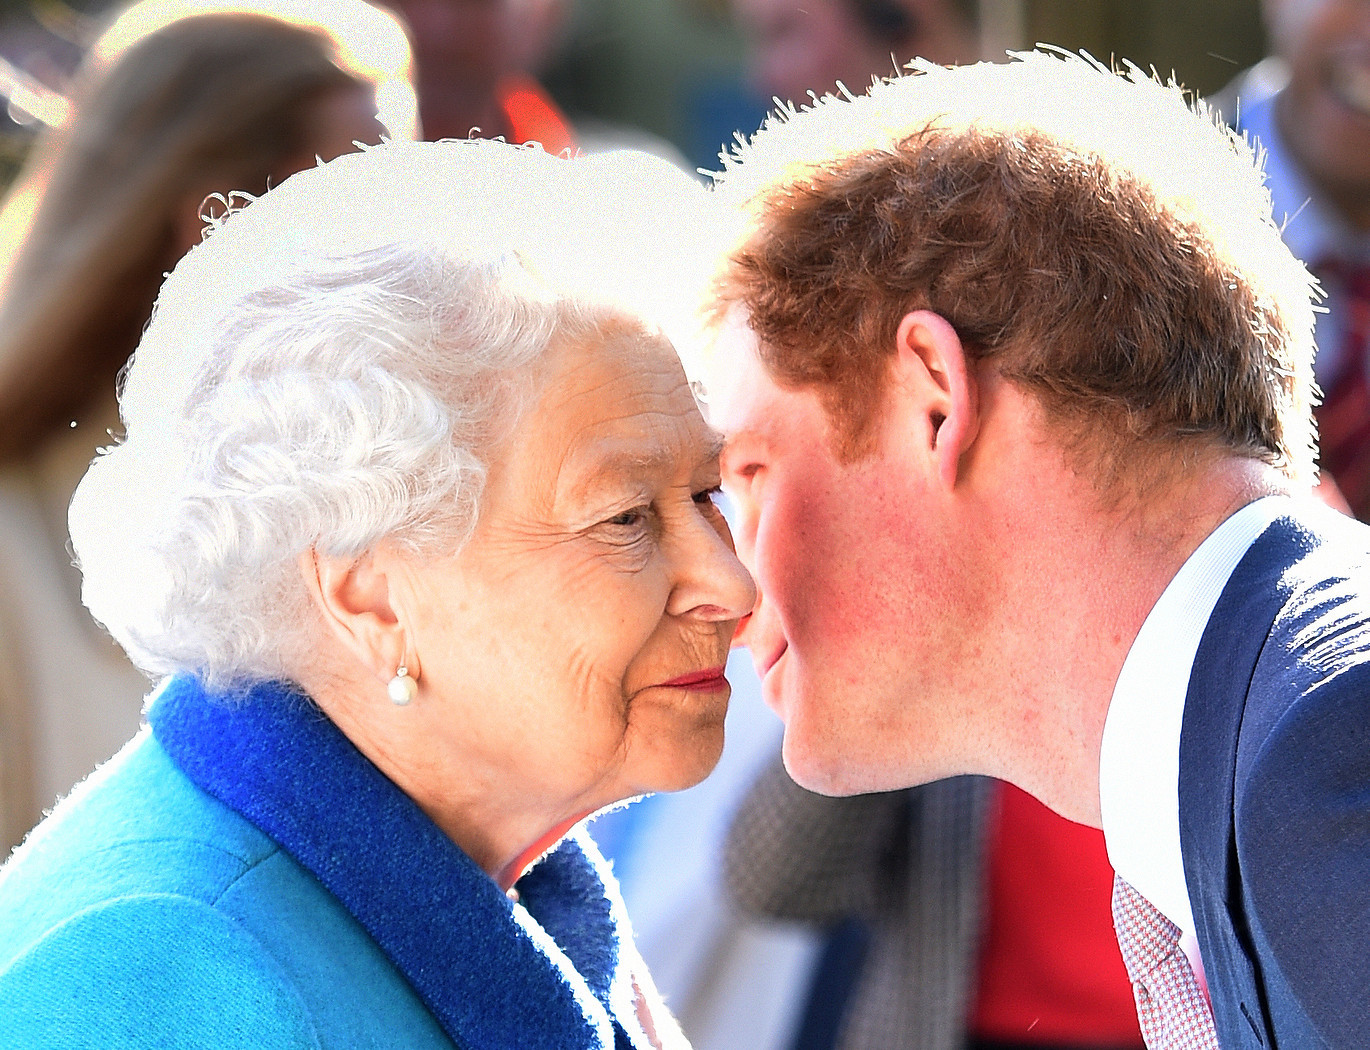 The Queen is a loving grandmother who Im sure listened to Harry and gave him great advice